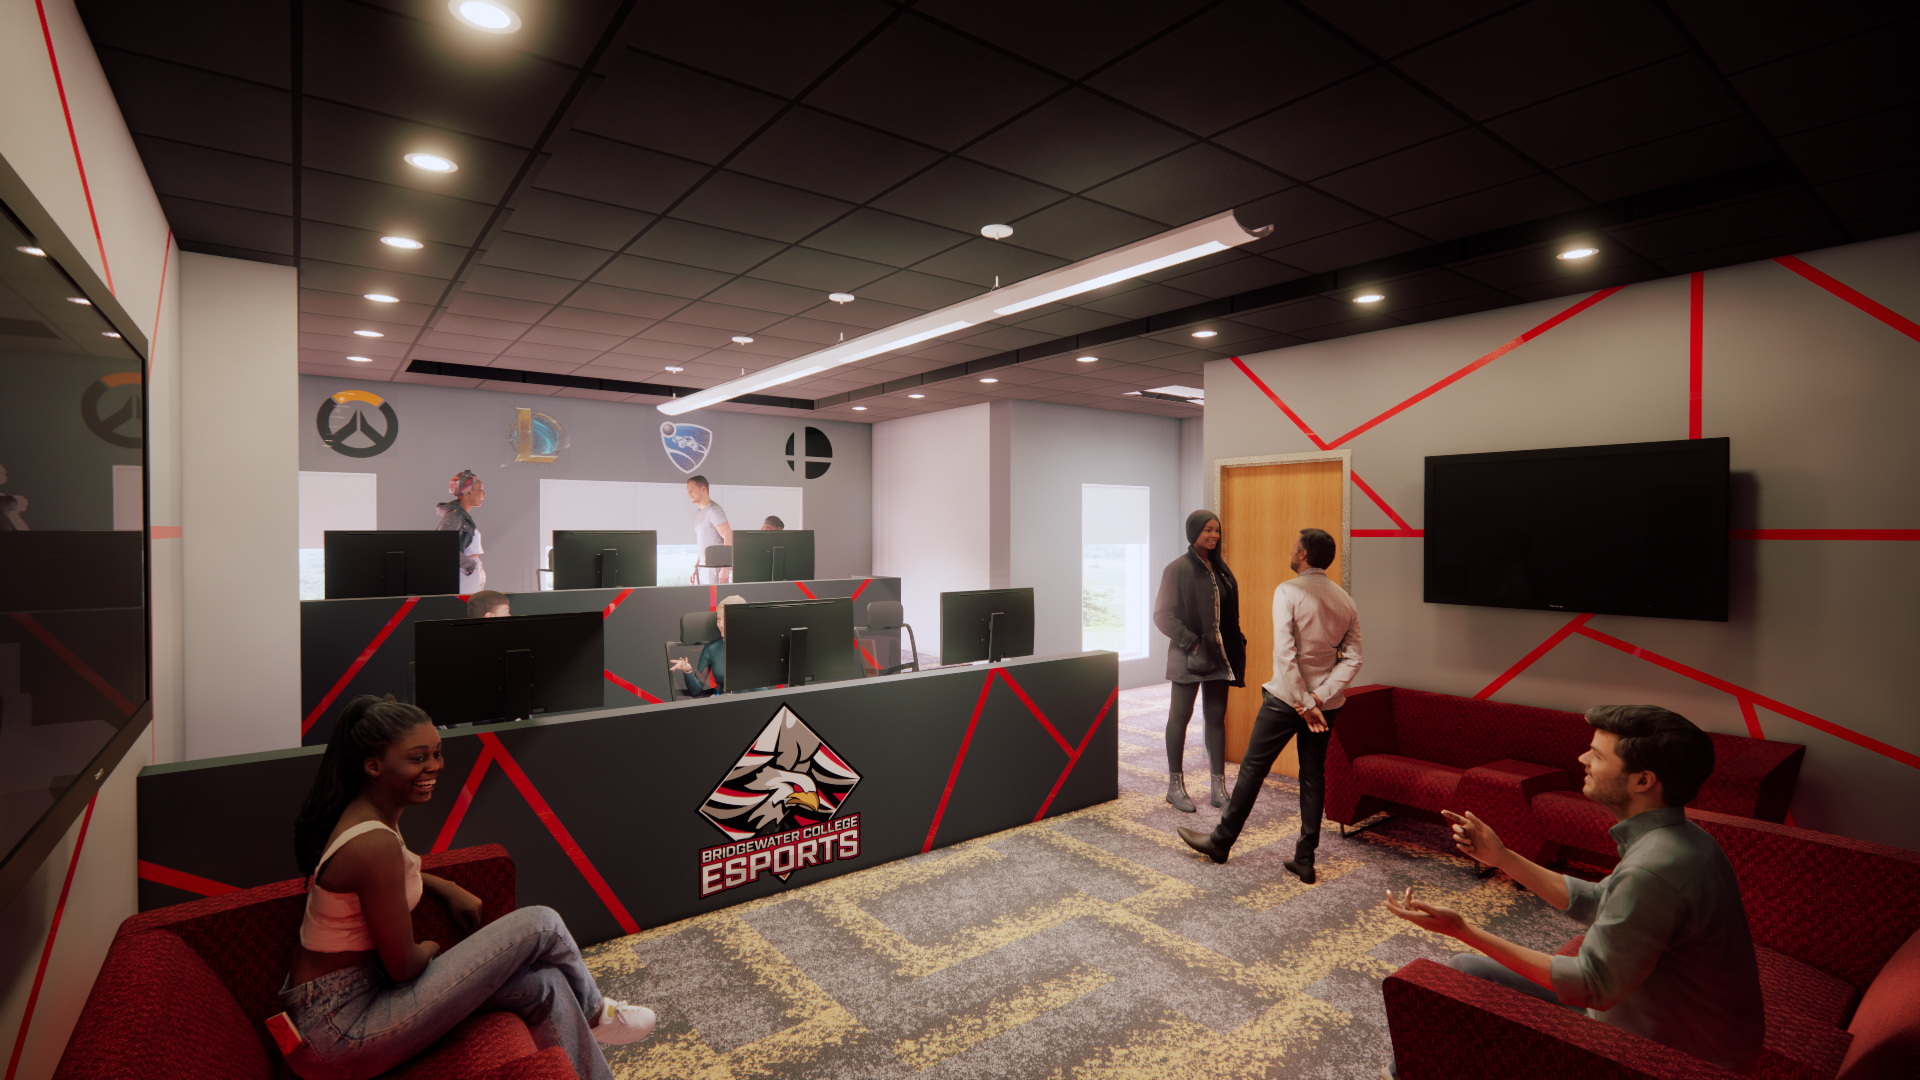 Image shows a rendering of Bridgewater College's esports area comprising of a room with multiple computer screens and a lounging area with a large tv